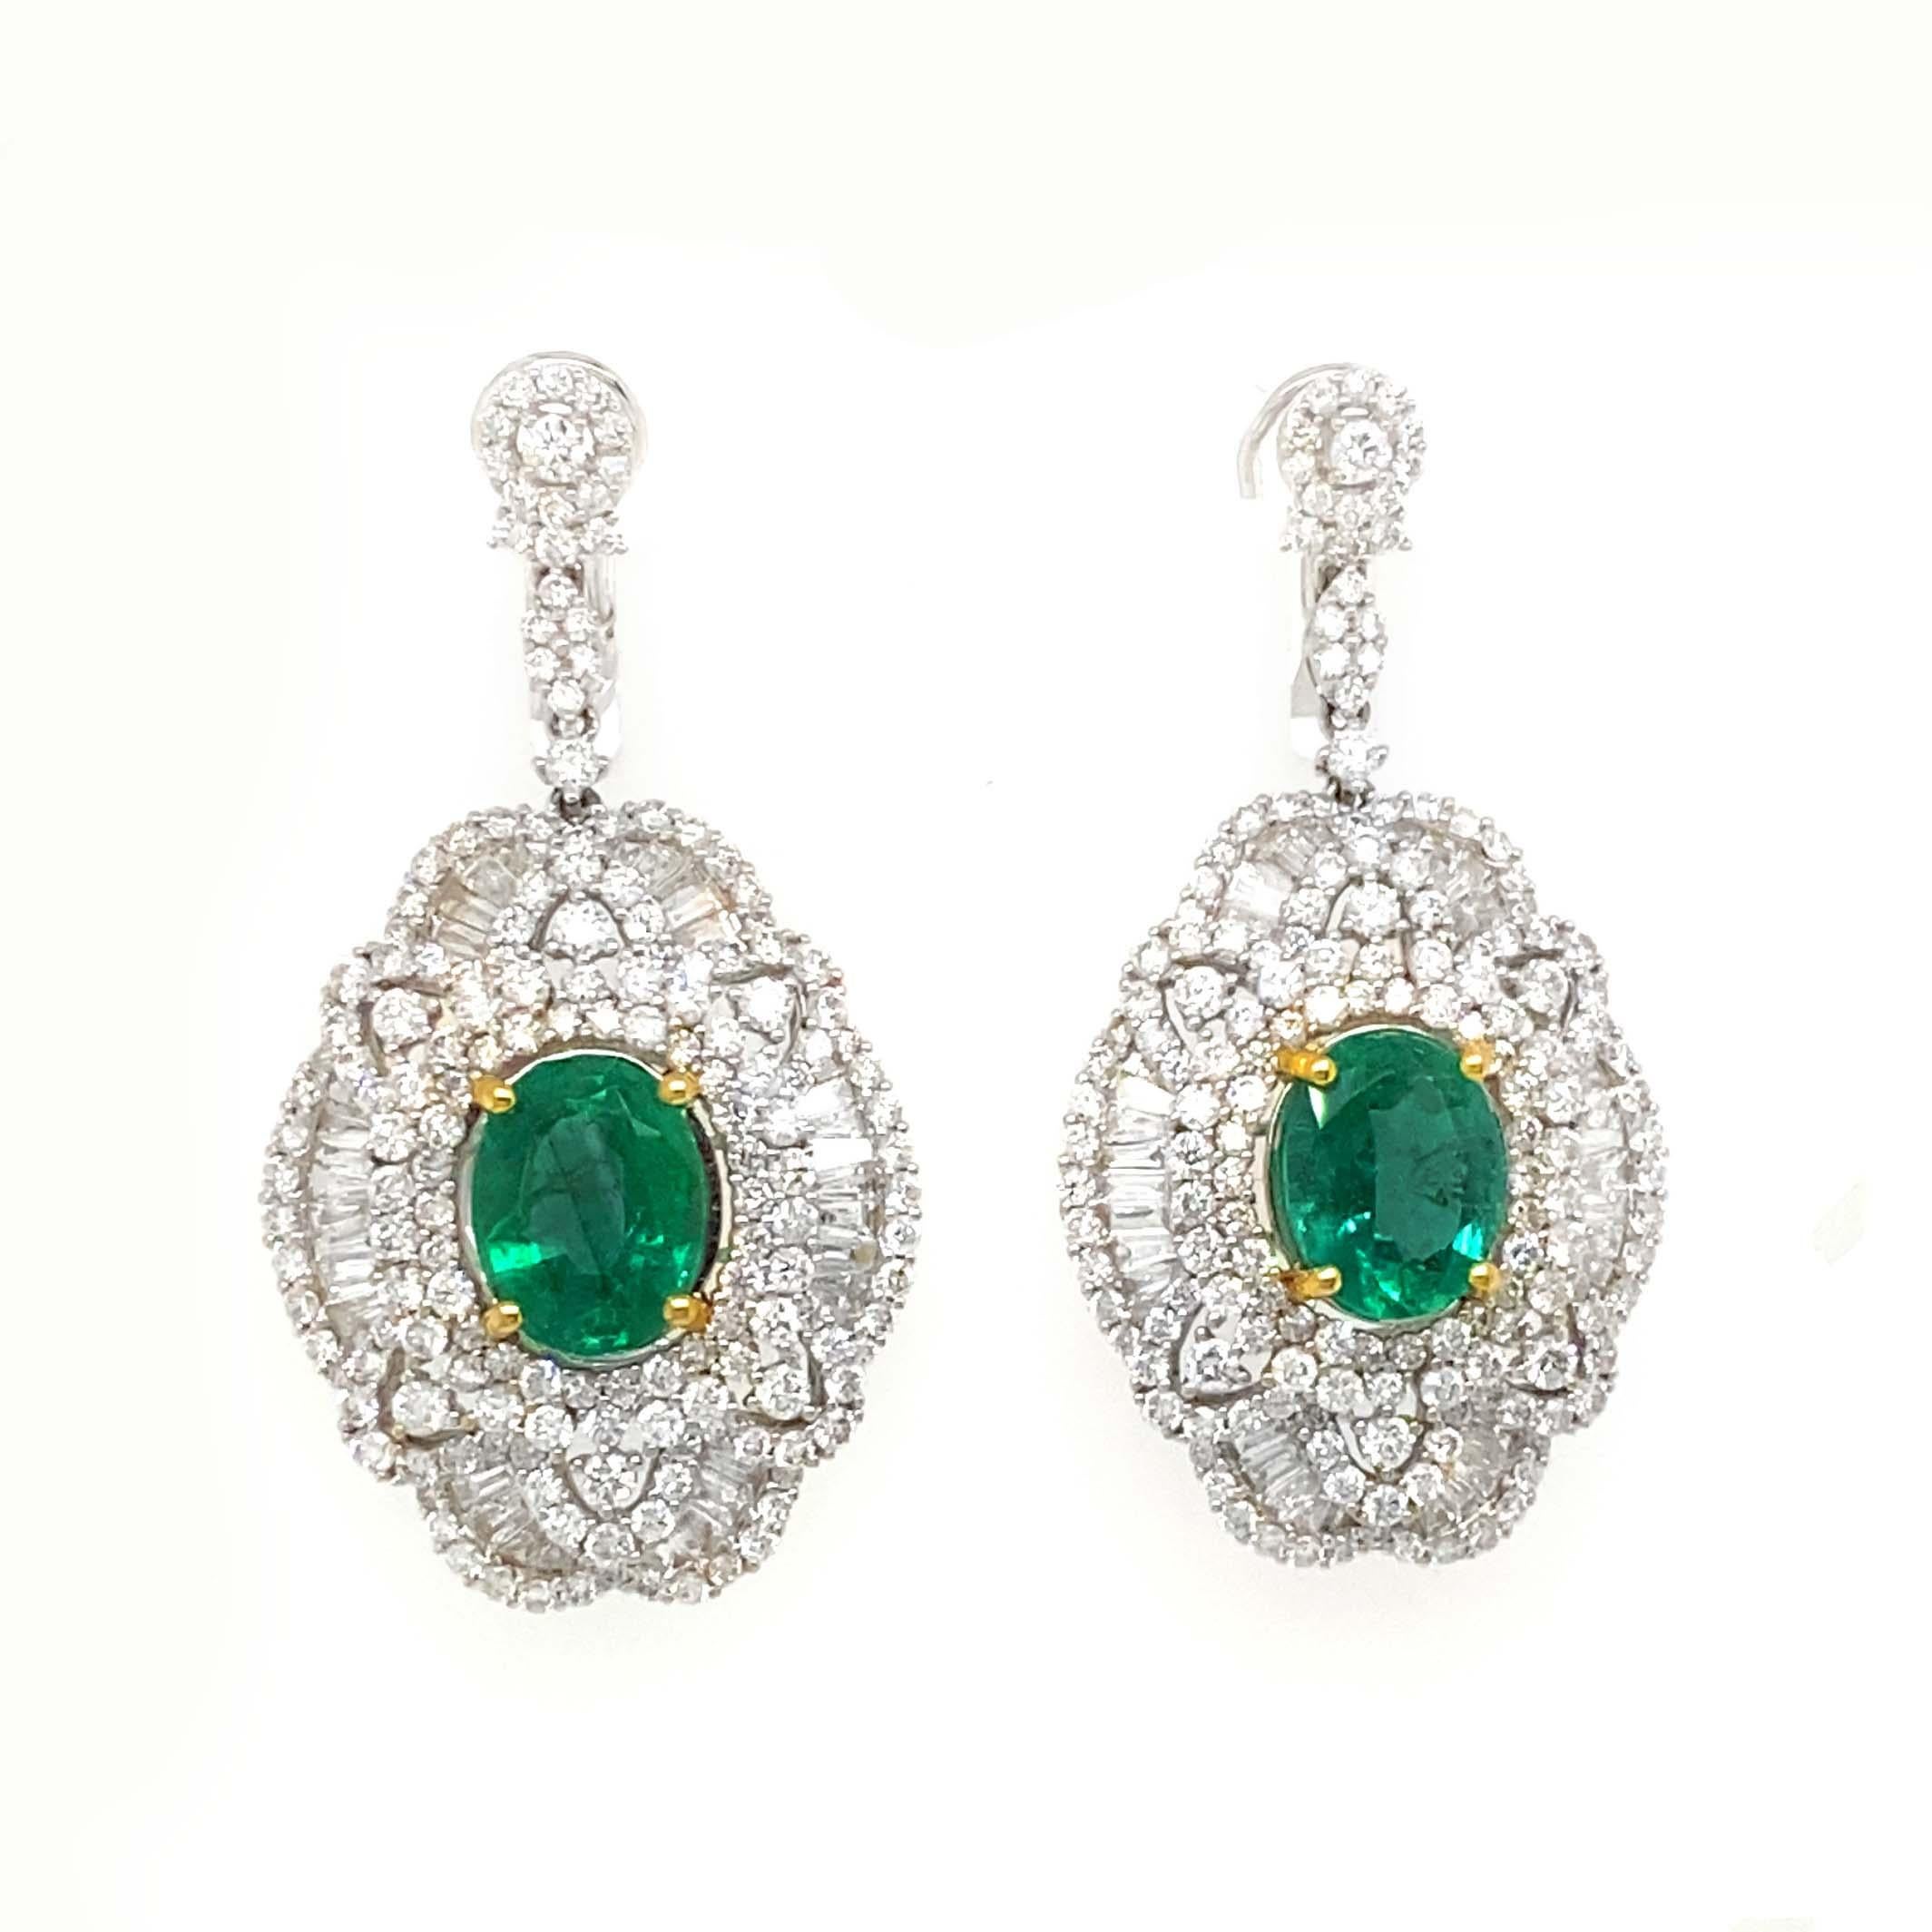 Round cut diamond earring studs drop to a beautifully designed cluster of diamonds with emeralds adorning the center. The main oval of the earrings includes a baguette and round cut diamonds. They surround the center which is a beautiful oval